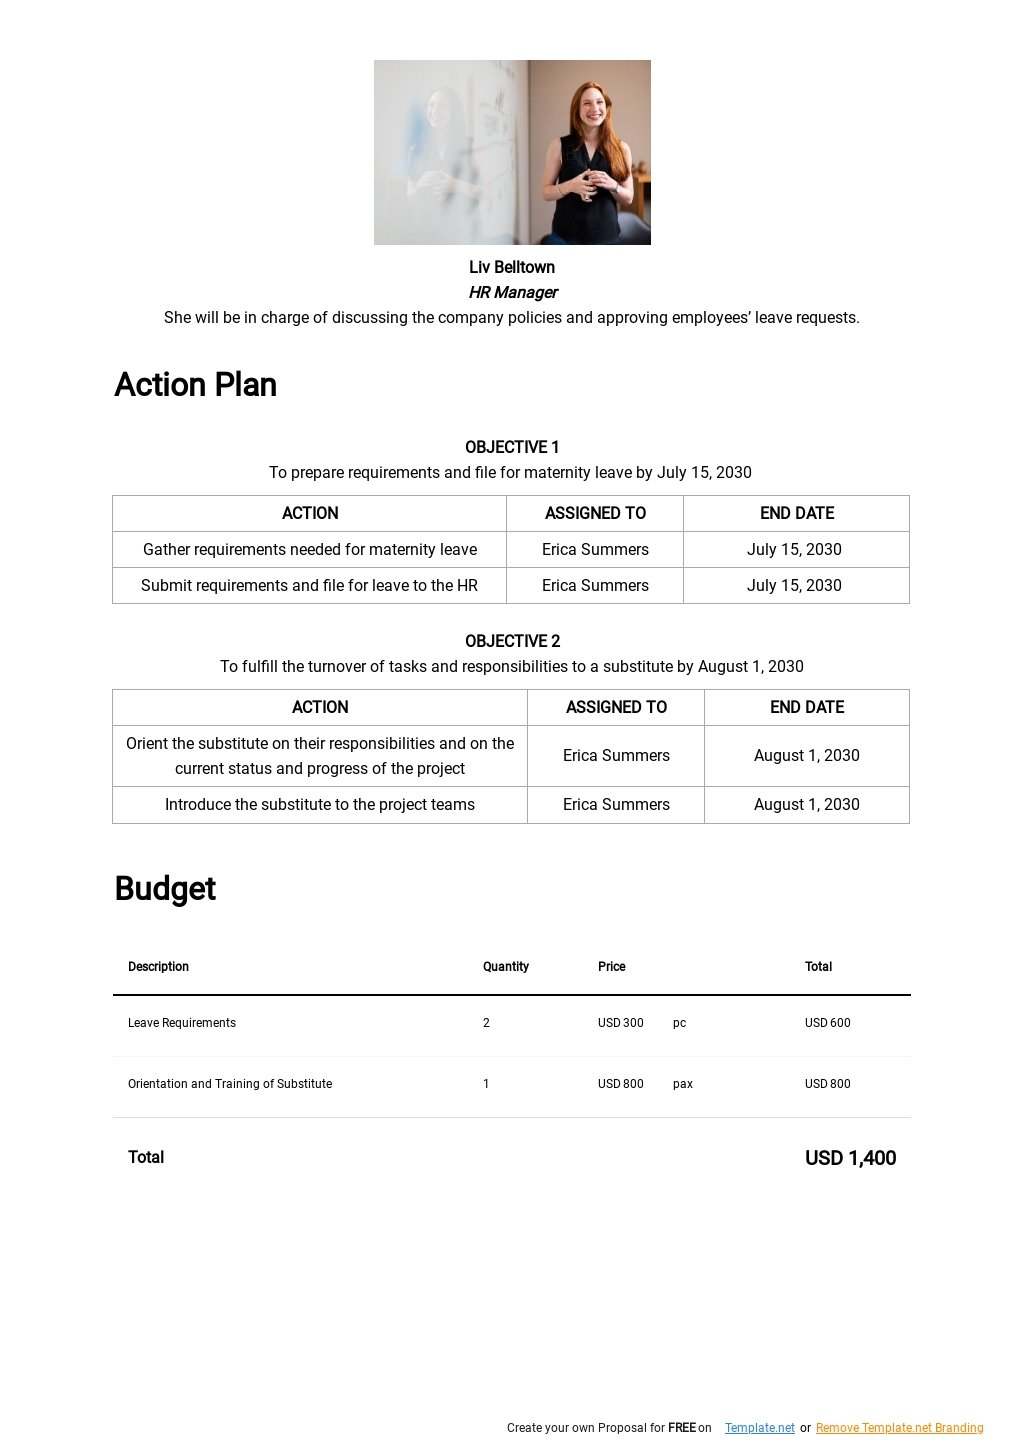 Maternity Leave Plan Template Brittney Taylor Vrogue